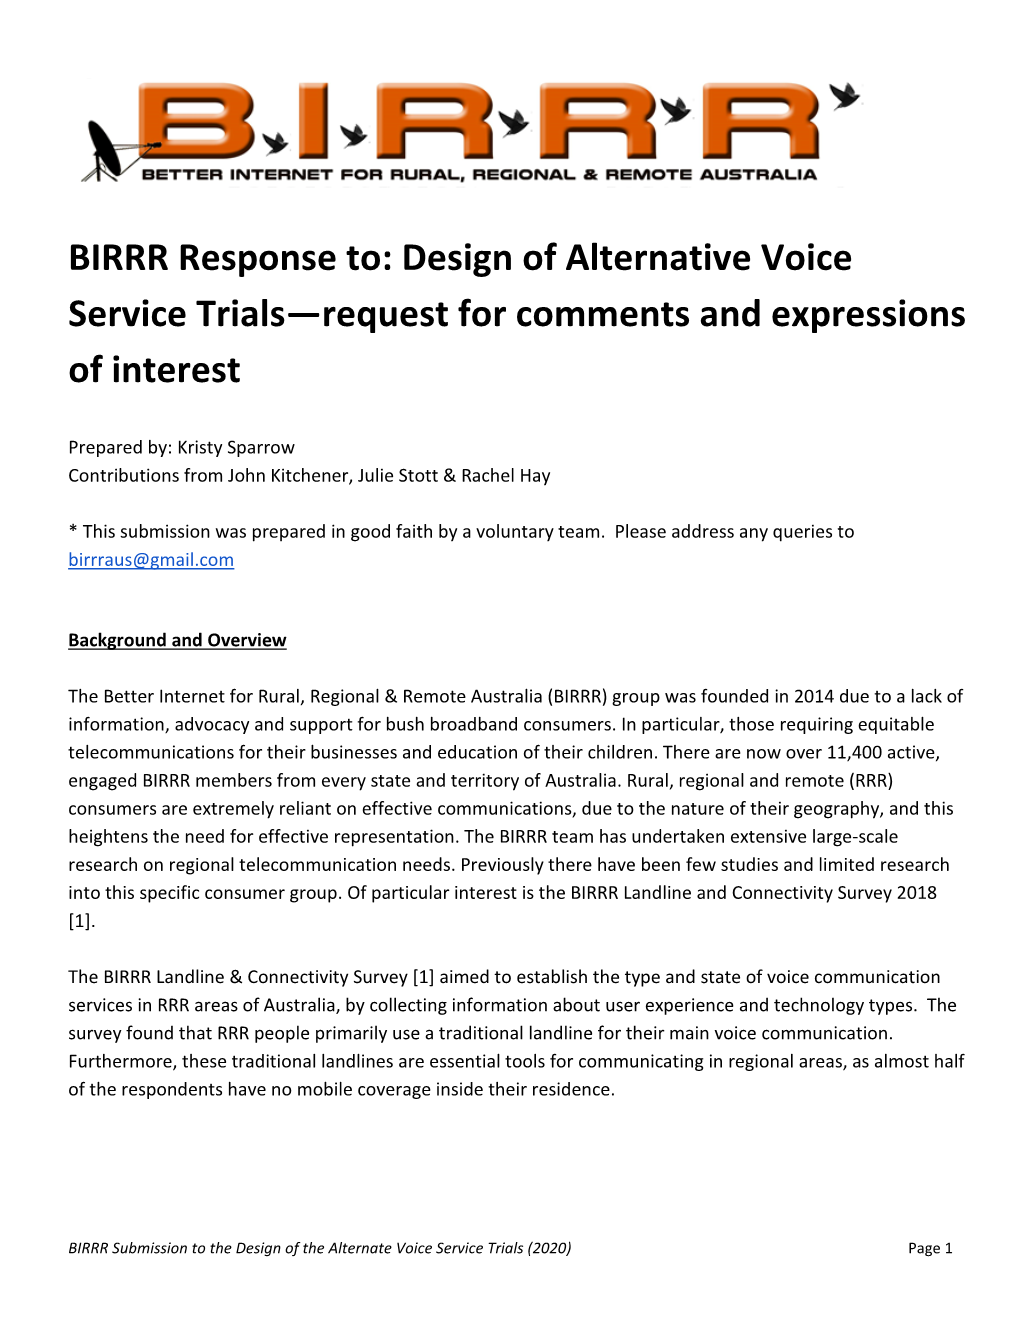 BIRRR Submission to the Design of the Alternate Voice Service Trials (2020) Page 1